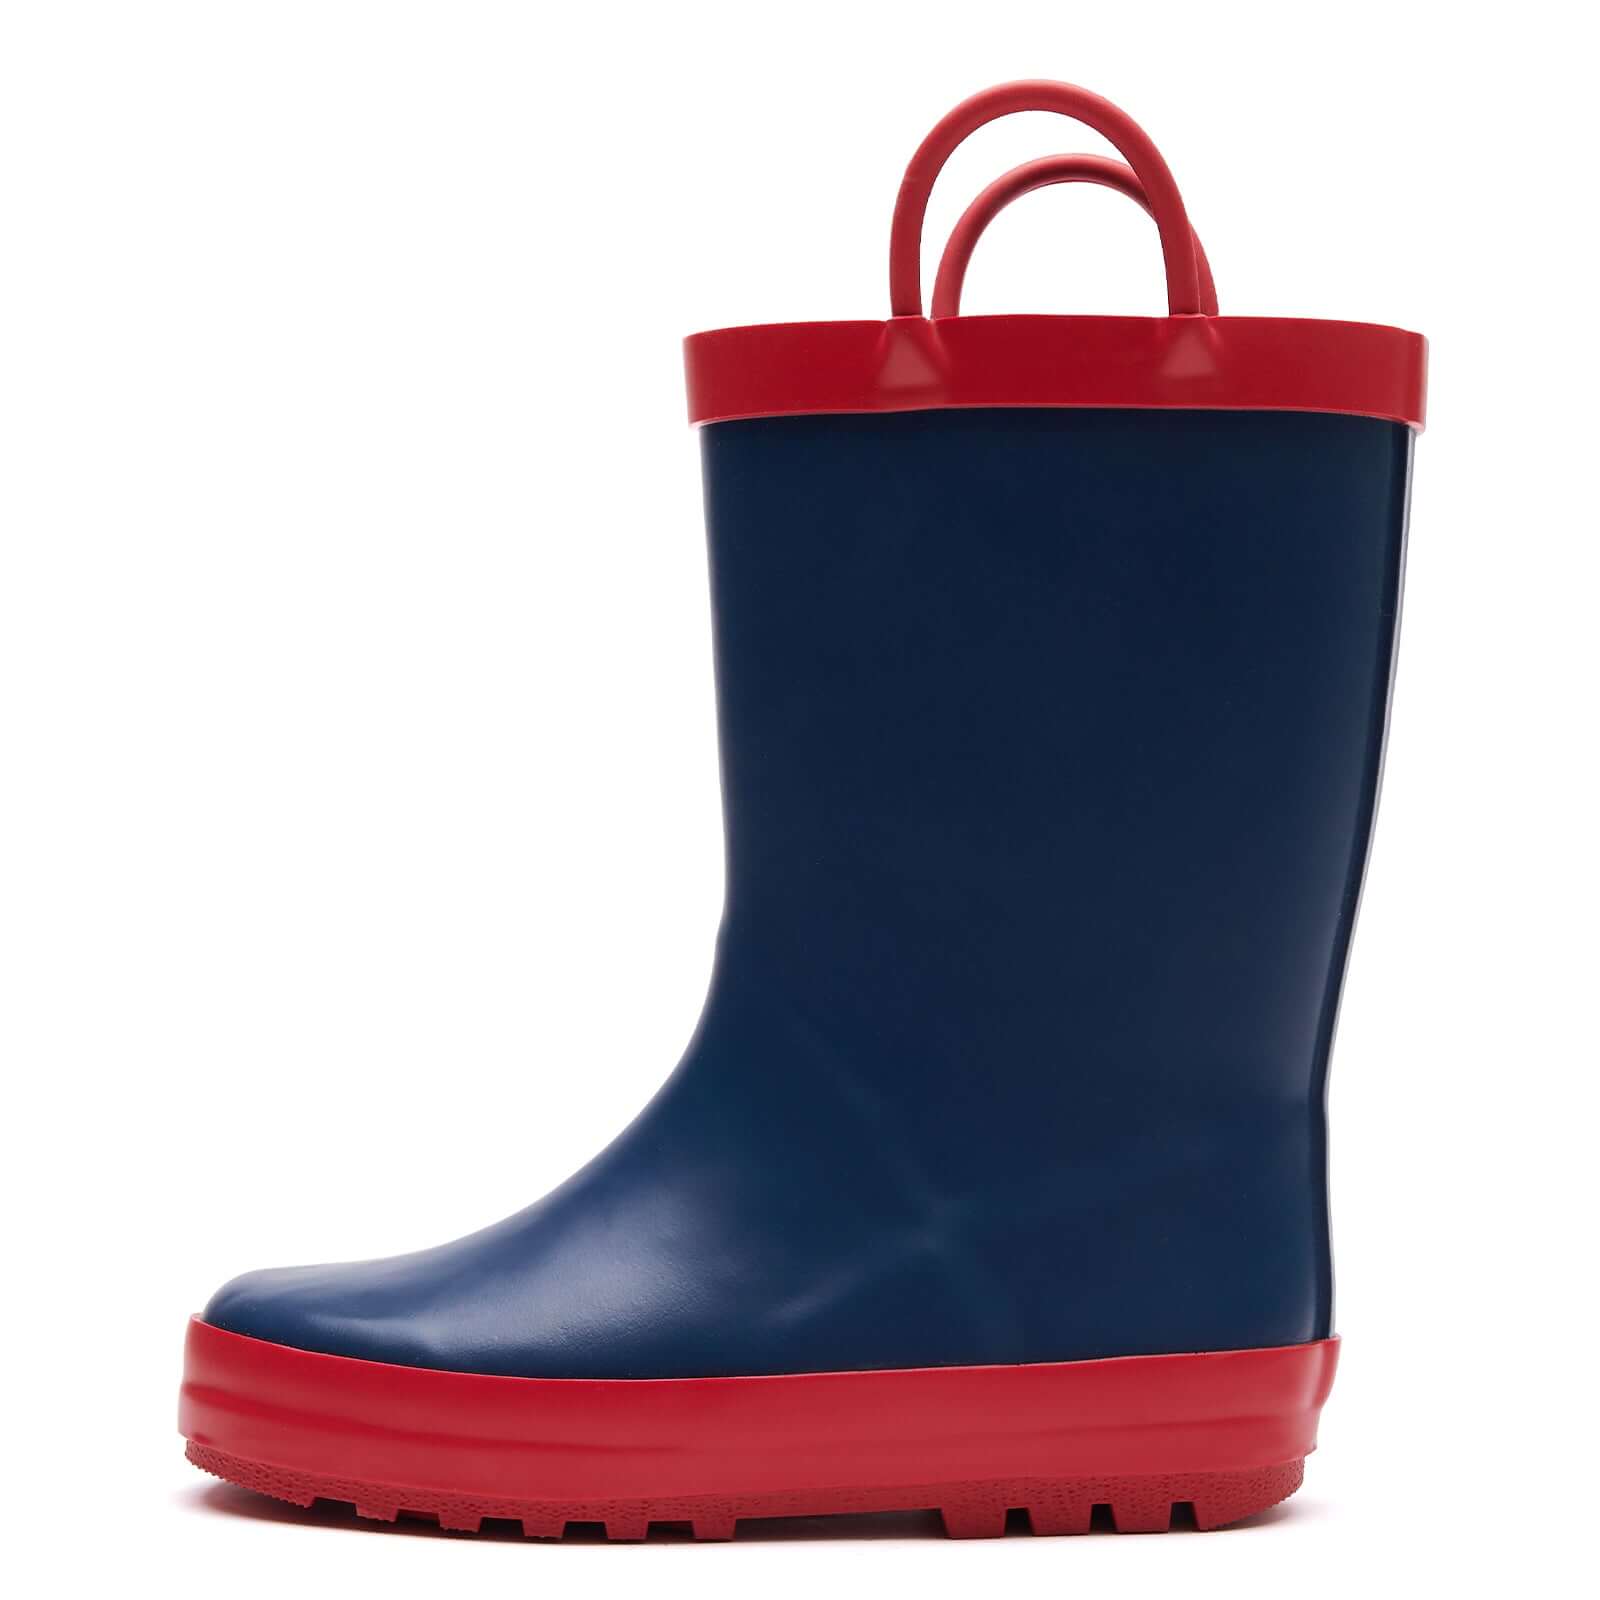 Navy Kids Rain Boots with Red Handles